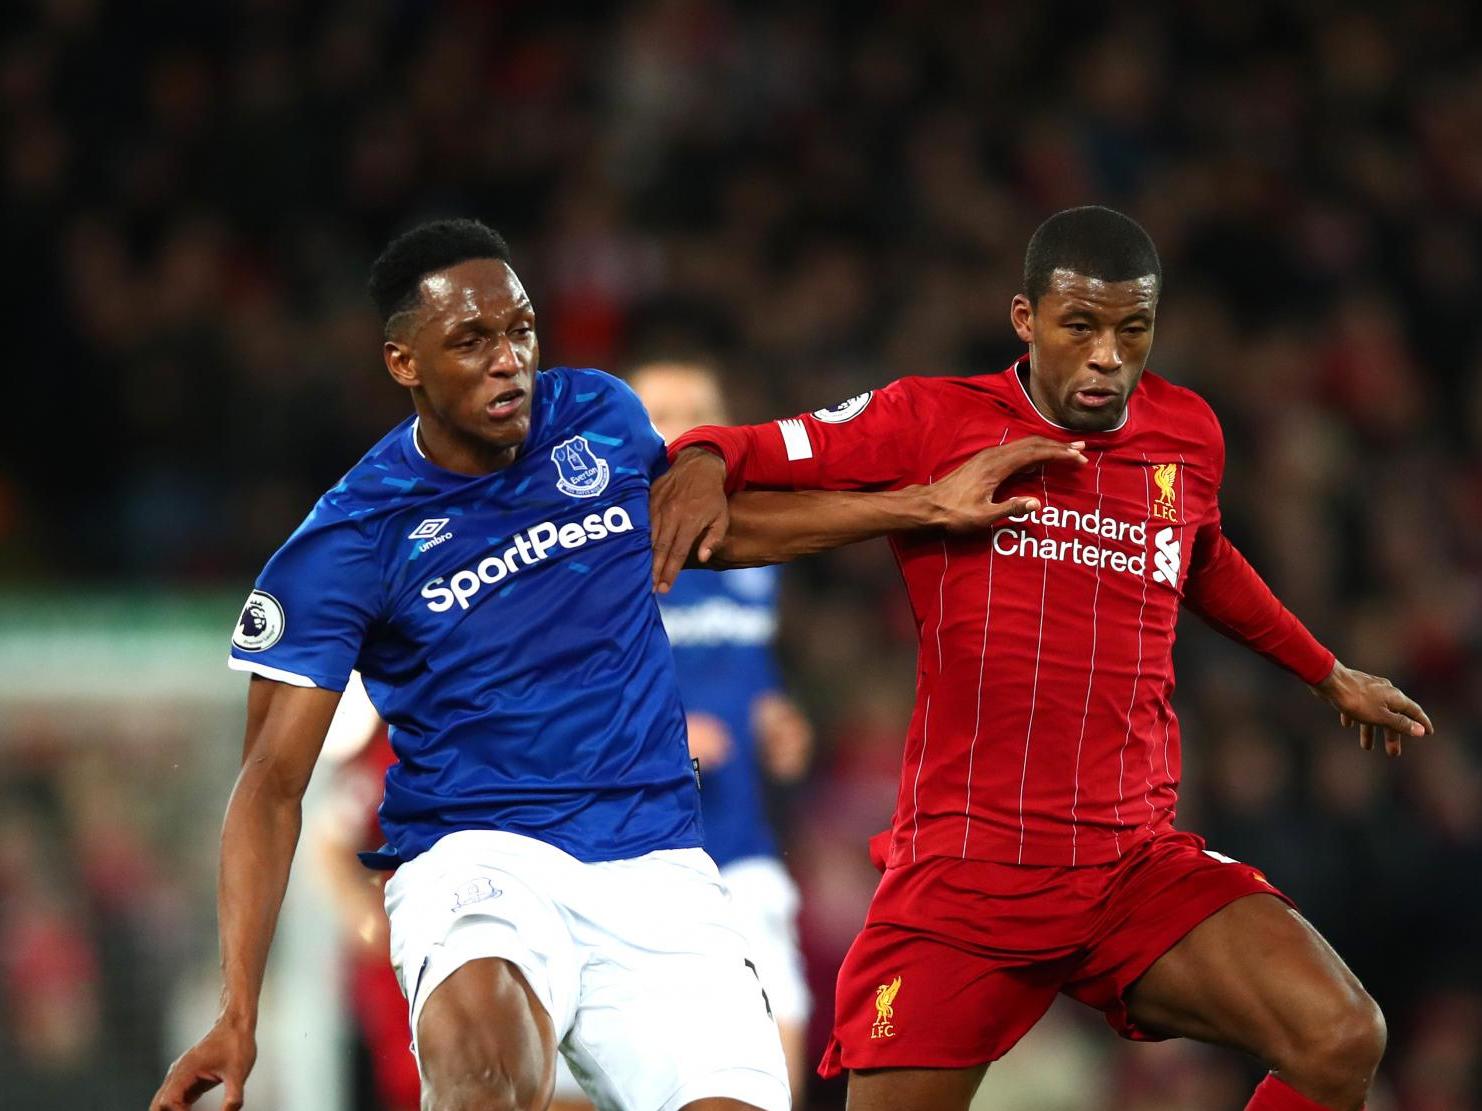 Everton vs Liverpool prediction: How will Premier League fixture play out tonight? thumbnail